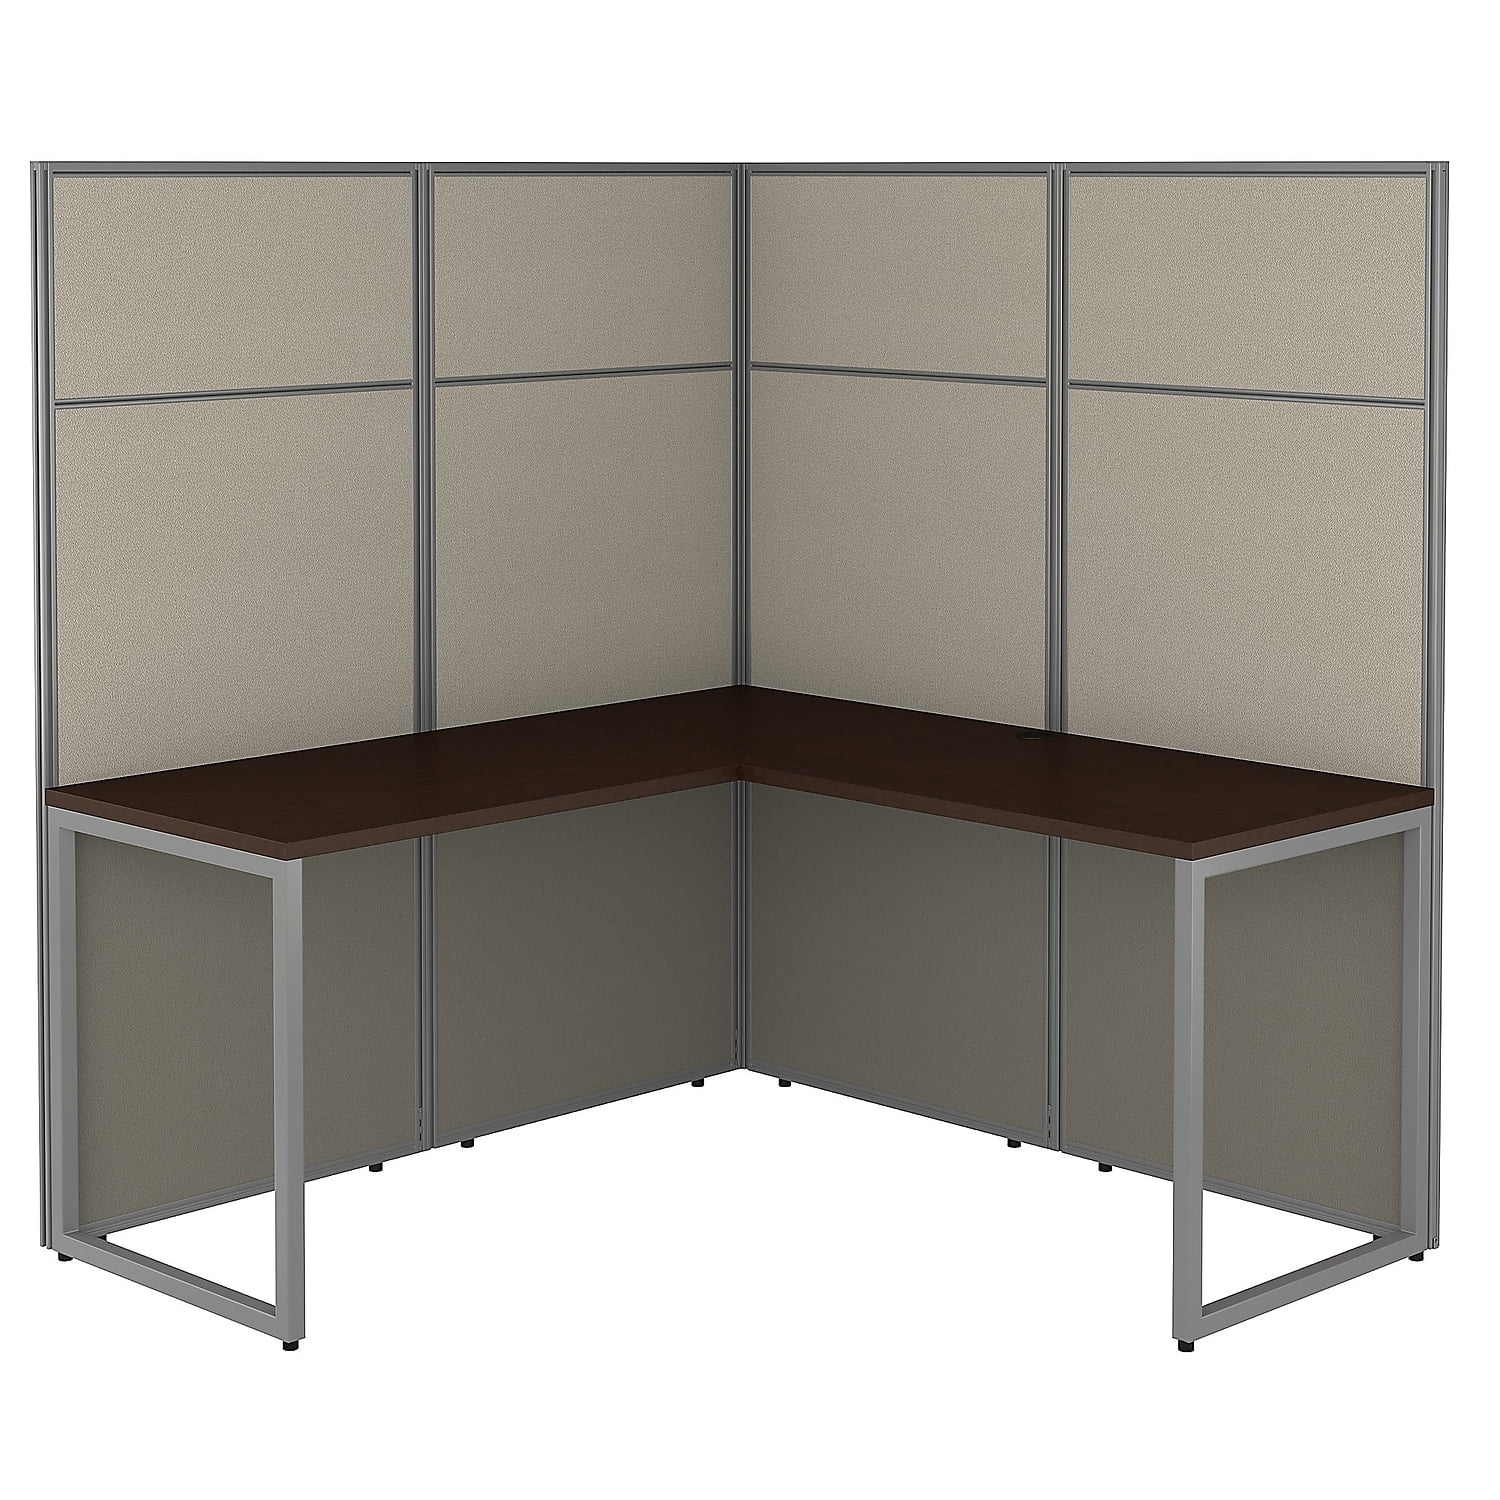 Picture of Bush Business Furniture EODH360MR-03K Easy Office L Shaped Desk with Cubicle Panel - Mocha Cherry